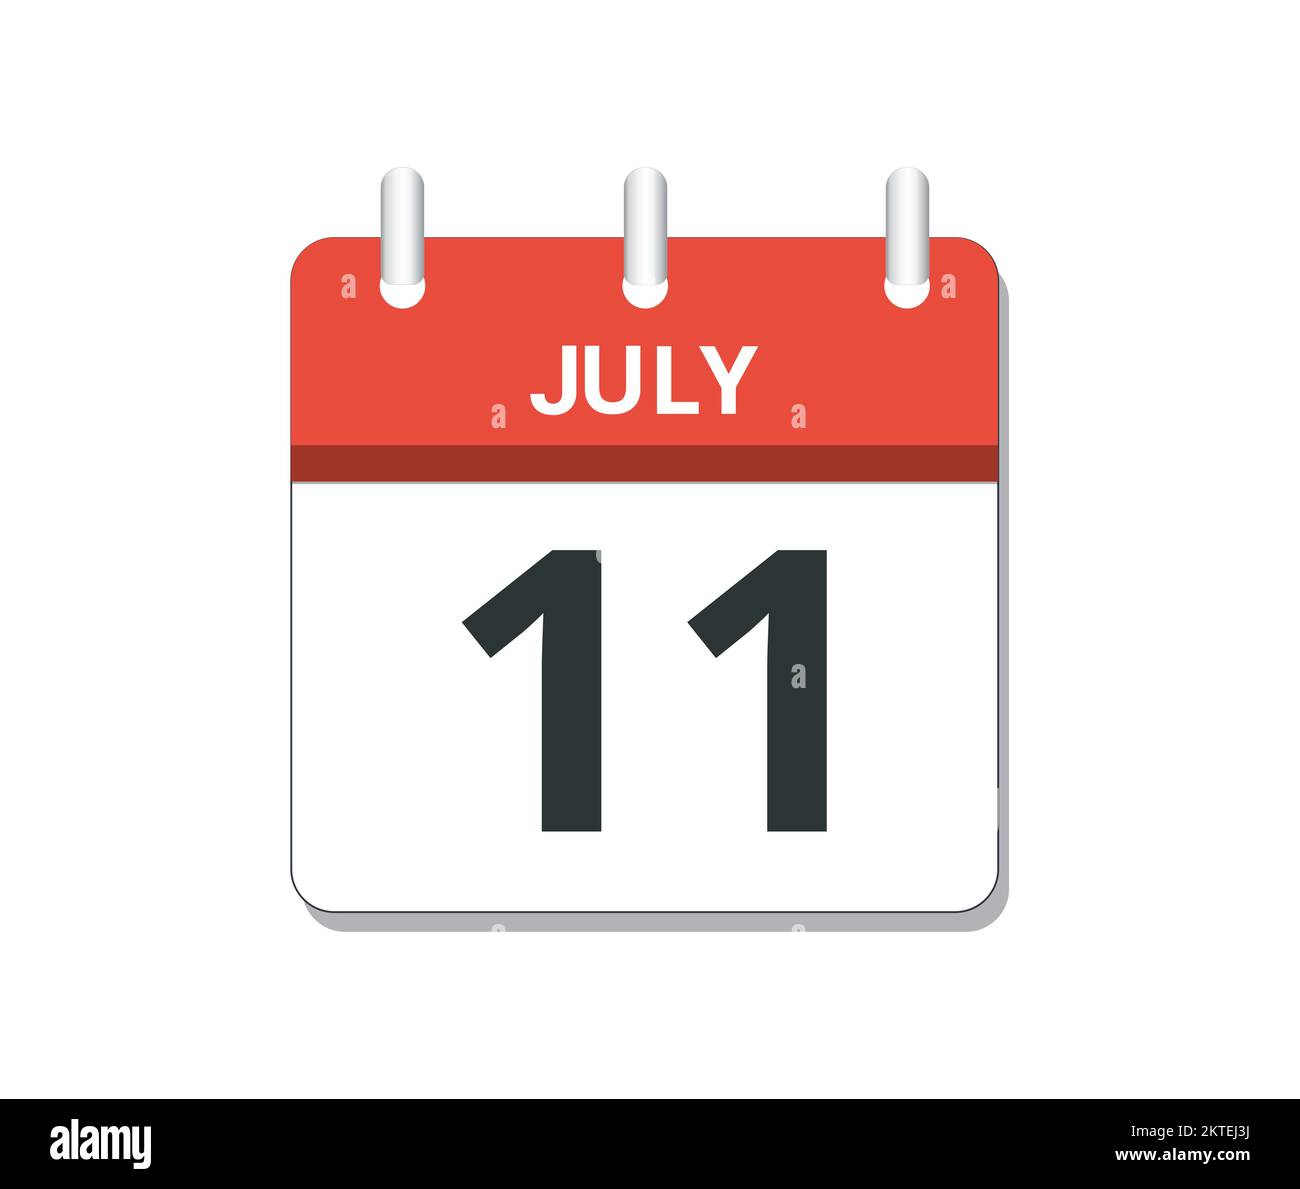 July 11th calendar icon vector. Concept of schedule, business and tasks Stock Vector